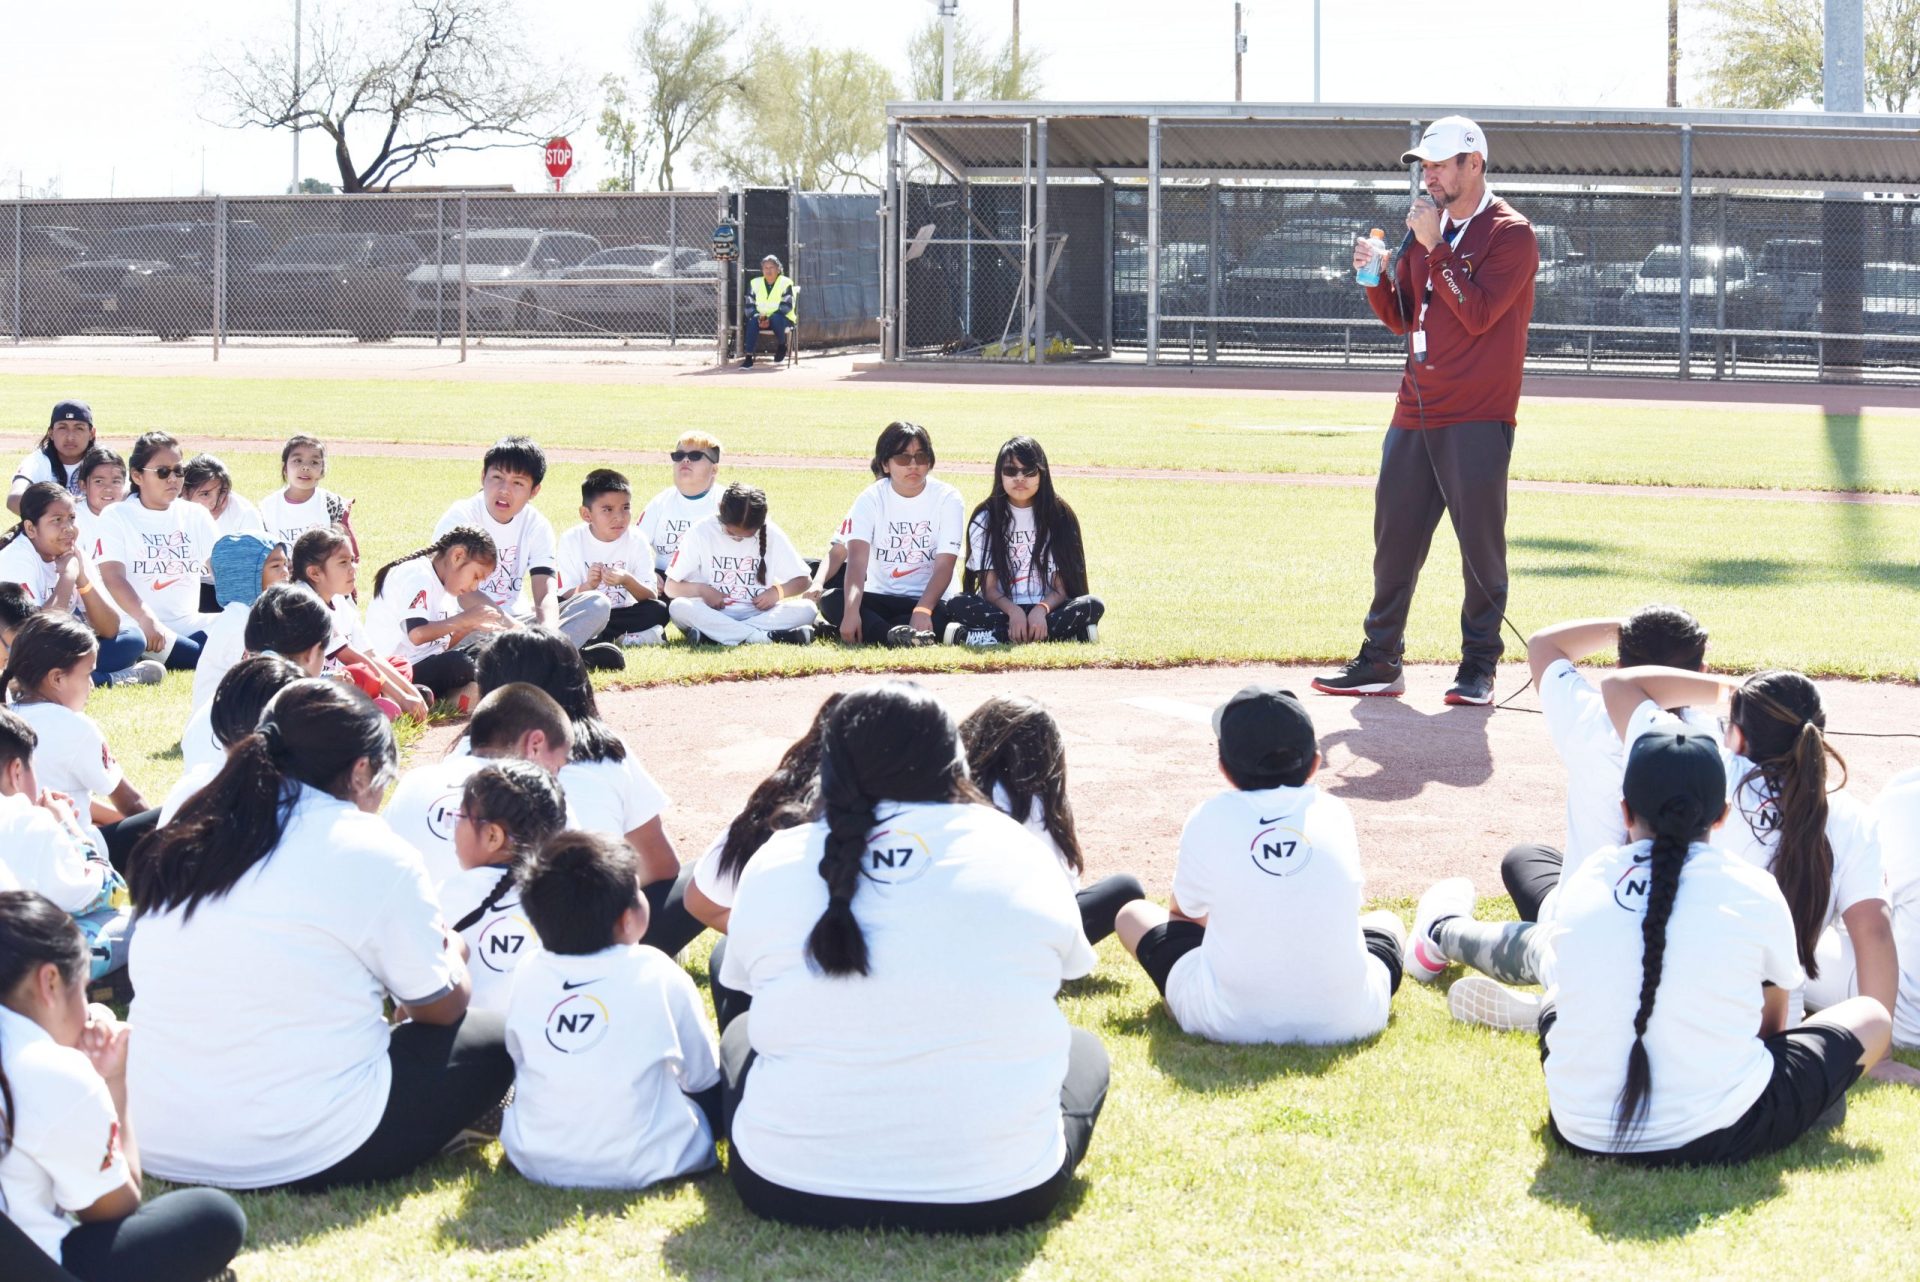 Nike N7 Baseball Experience Focuses on Physical Activity for Community Youth